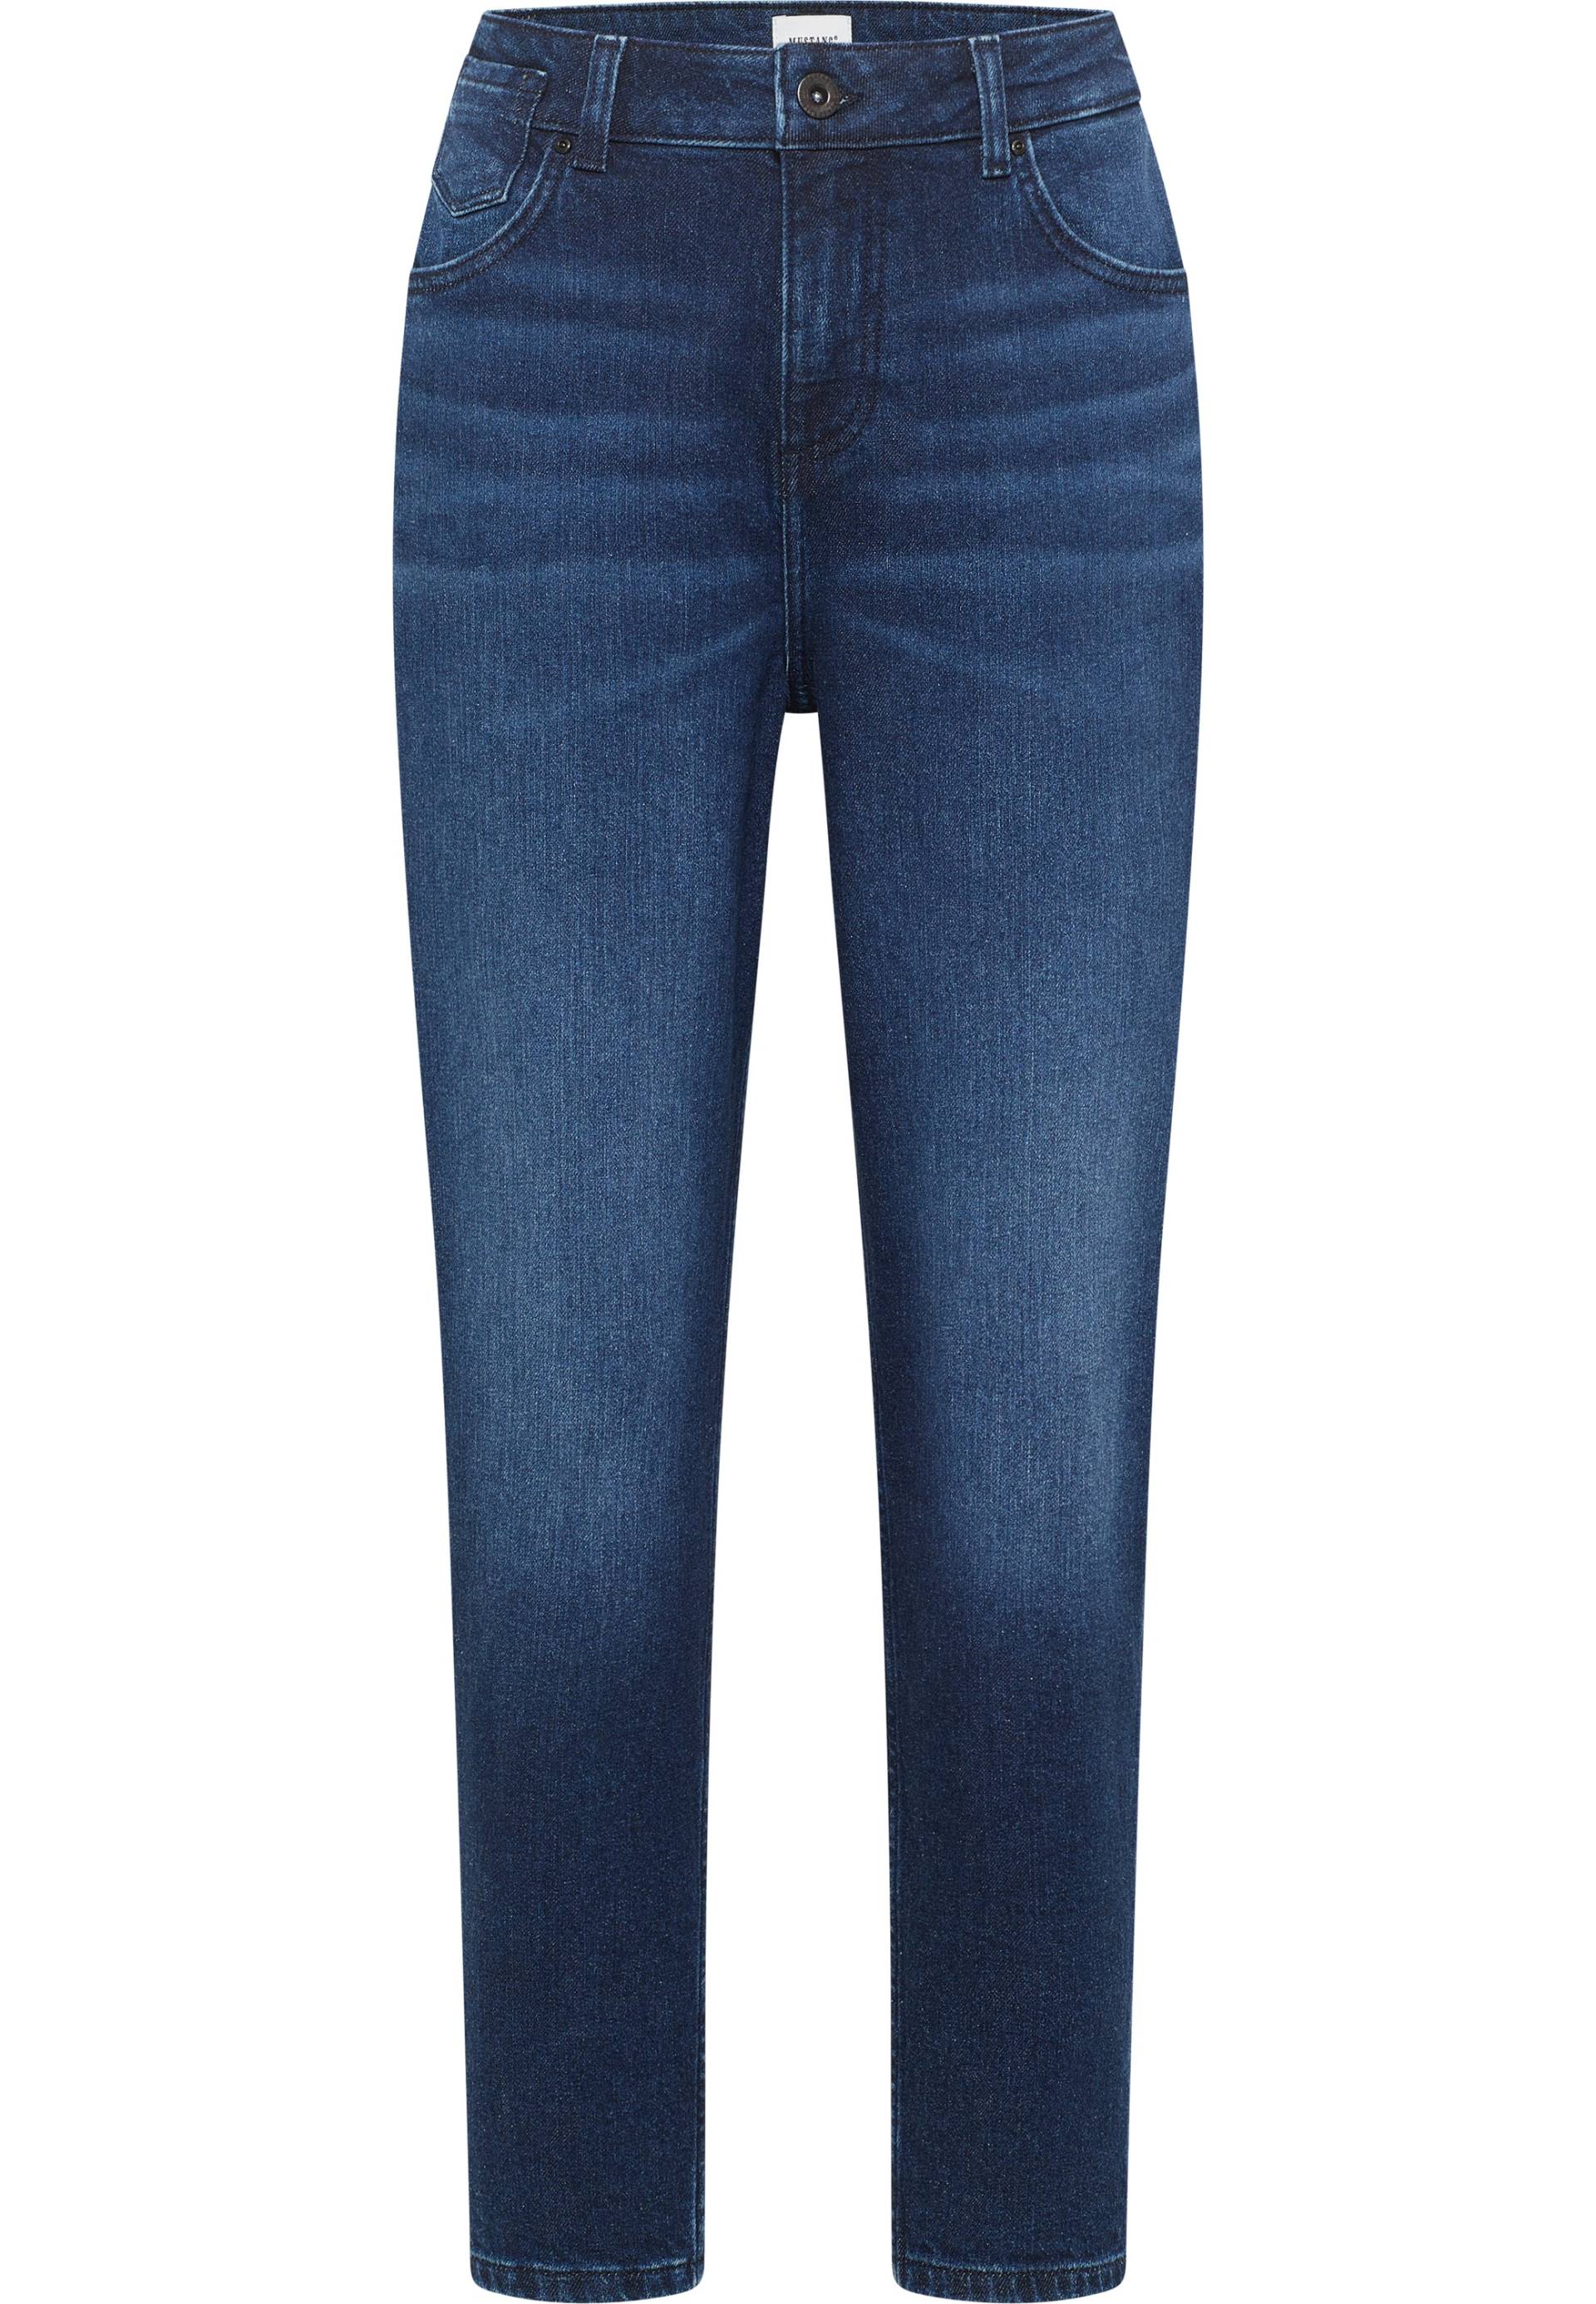 MUSTANG Mom-Jeans »Style Charlotte Tapered« von Mustang